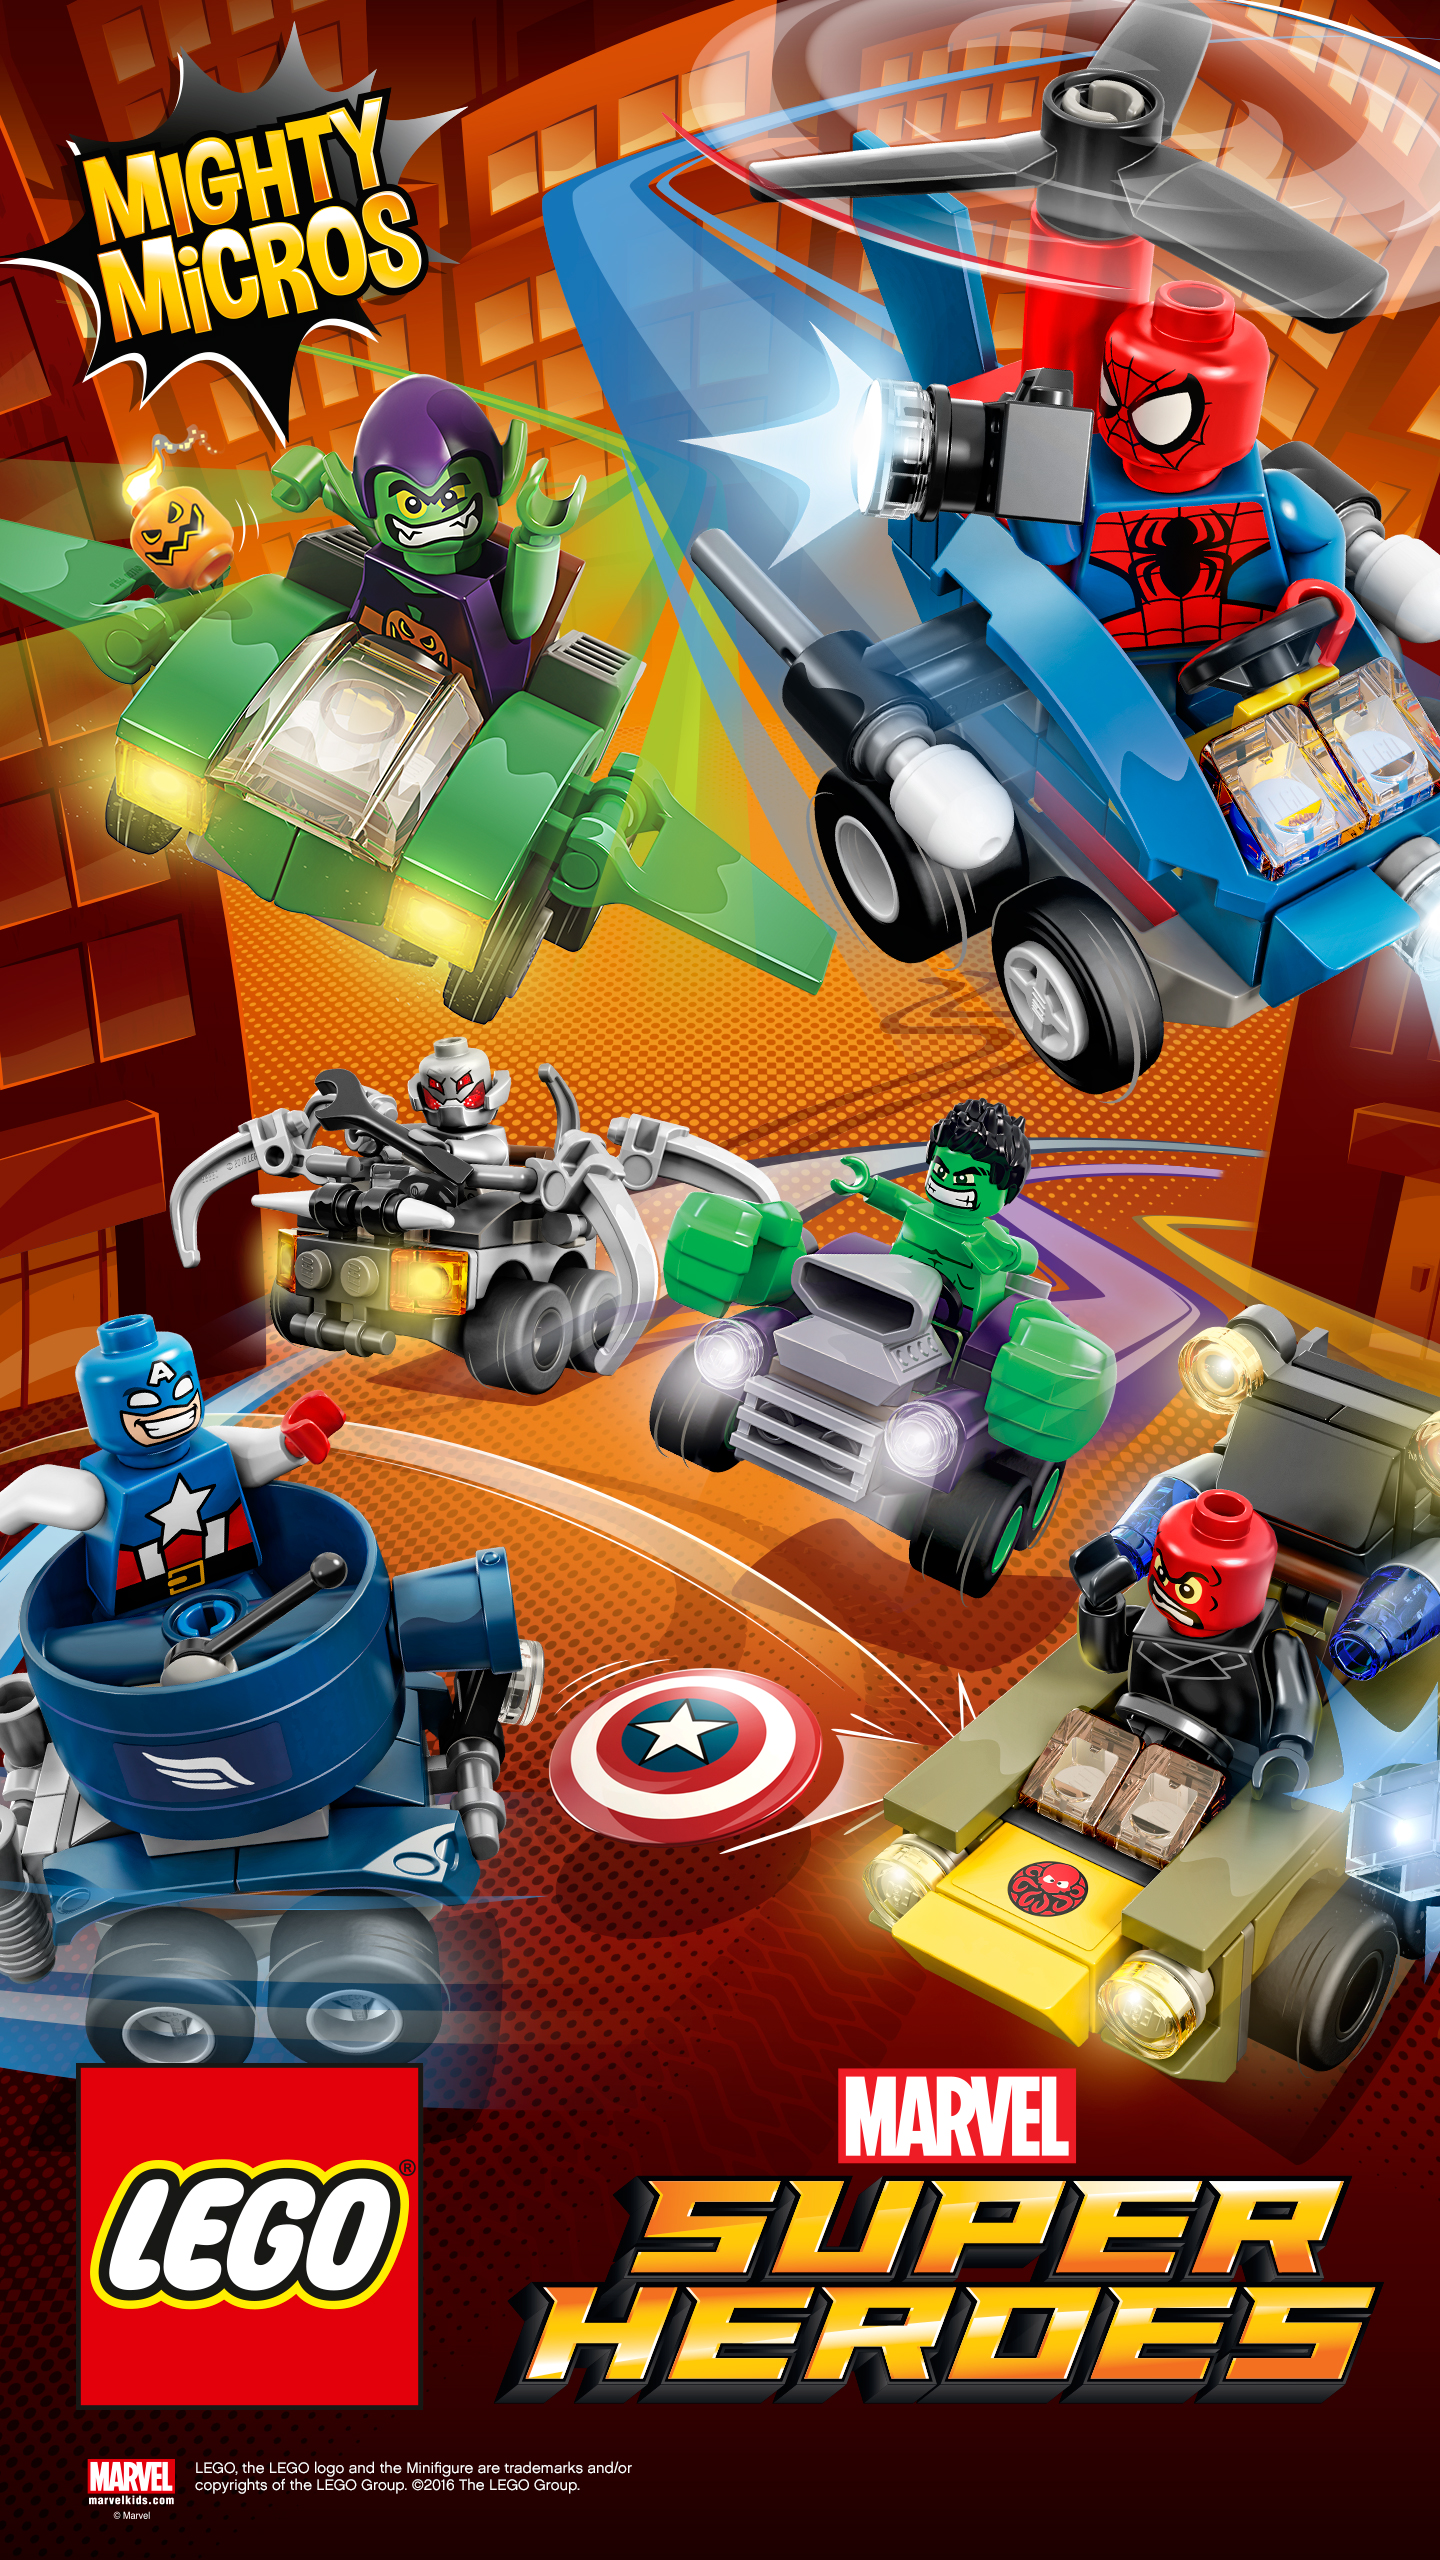 Marvel Mighty Micros - Lego , HD Wallpaper & Backgrounds